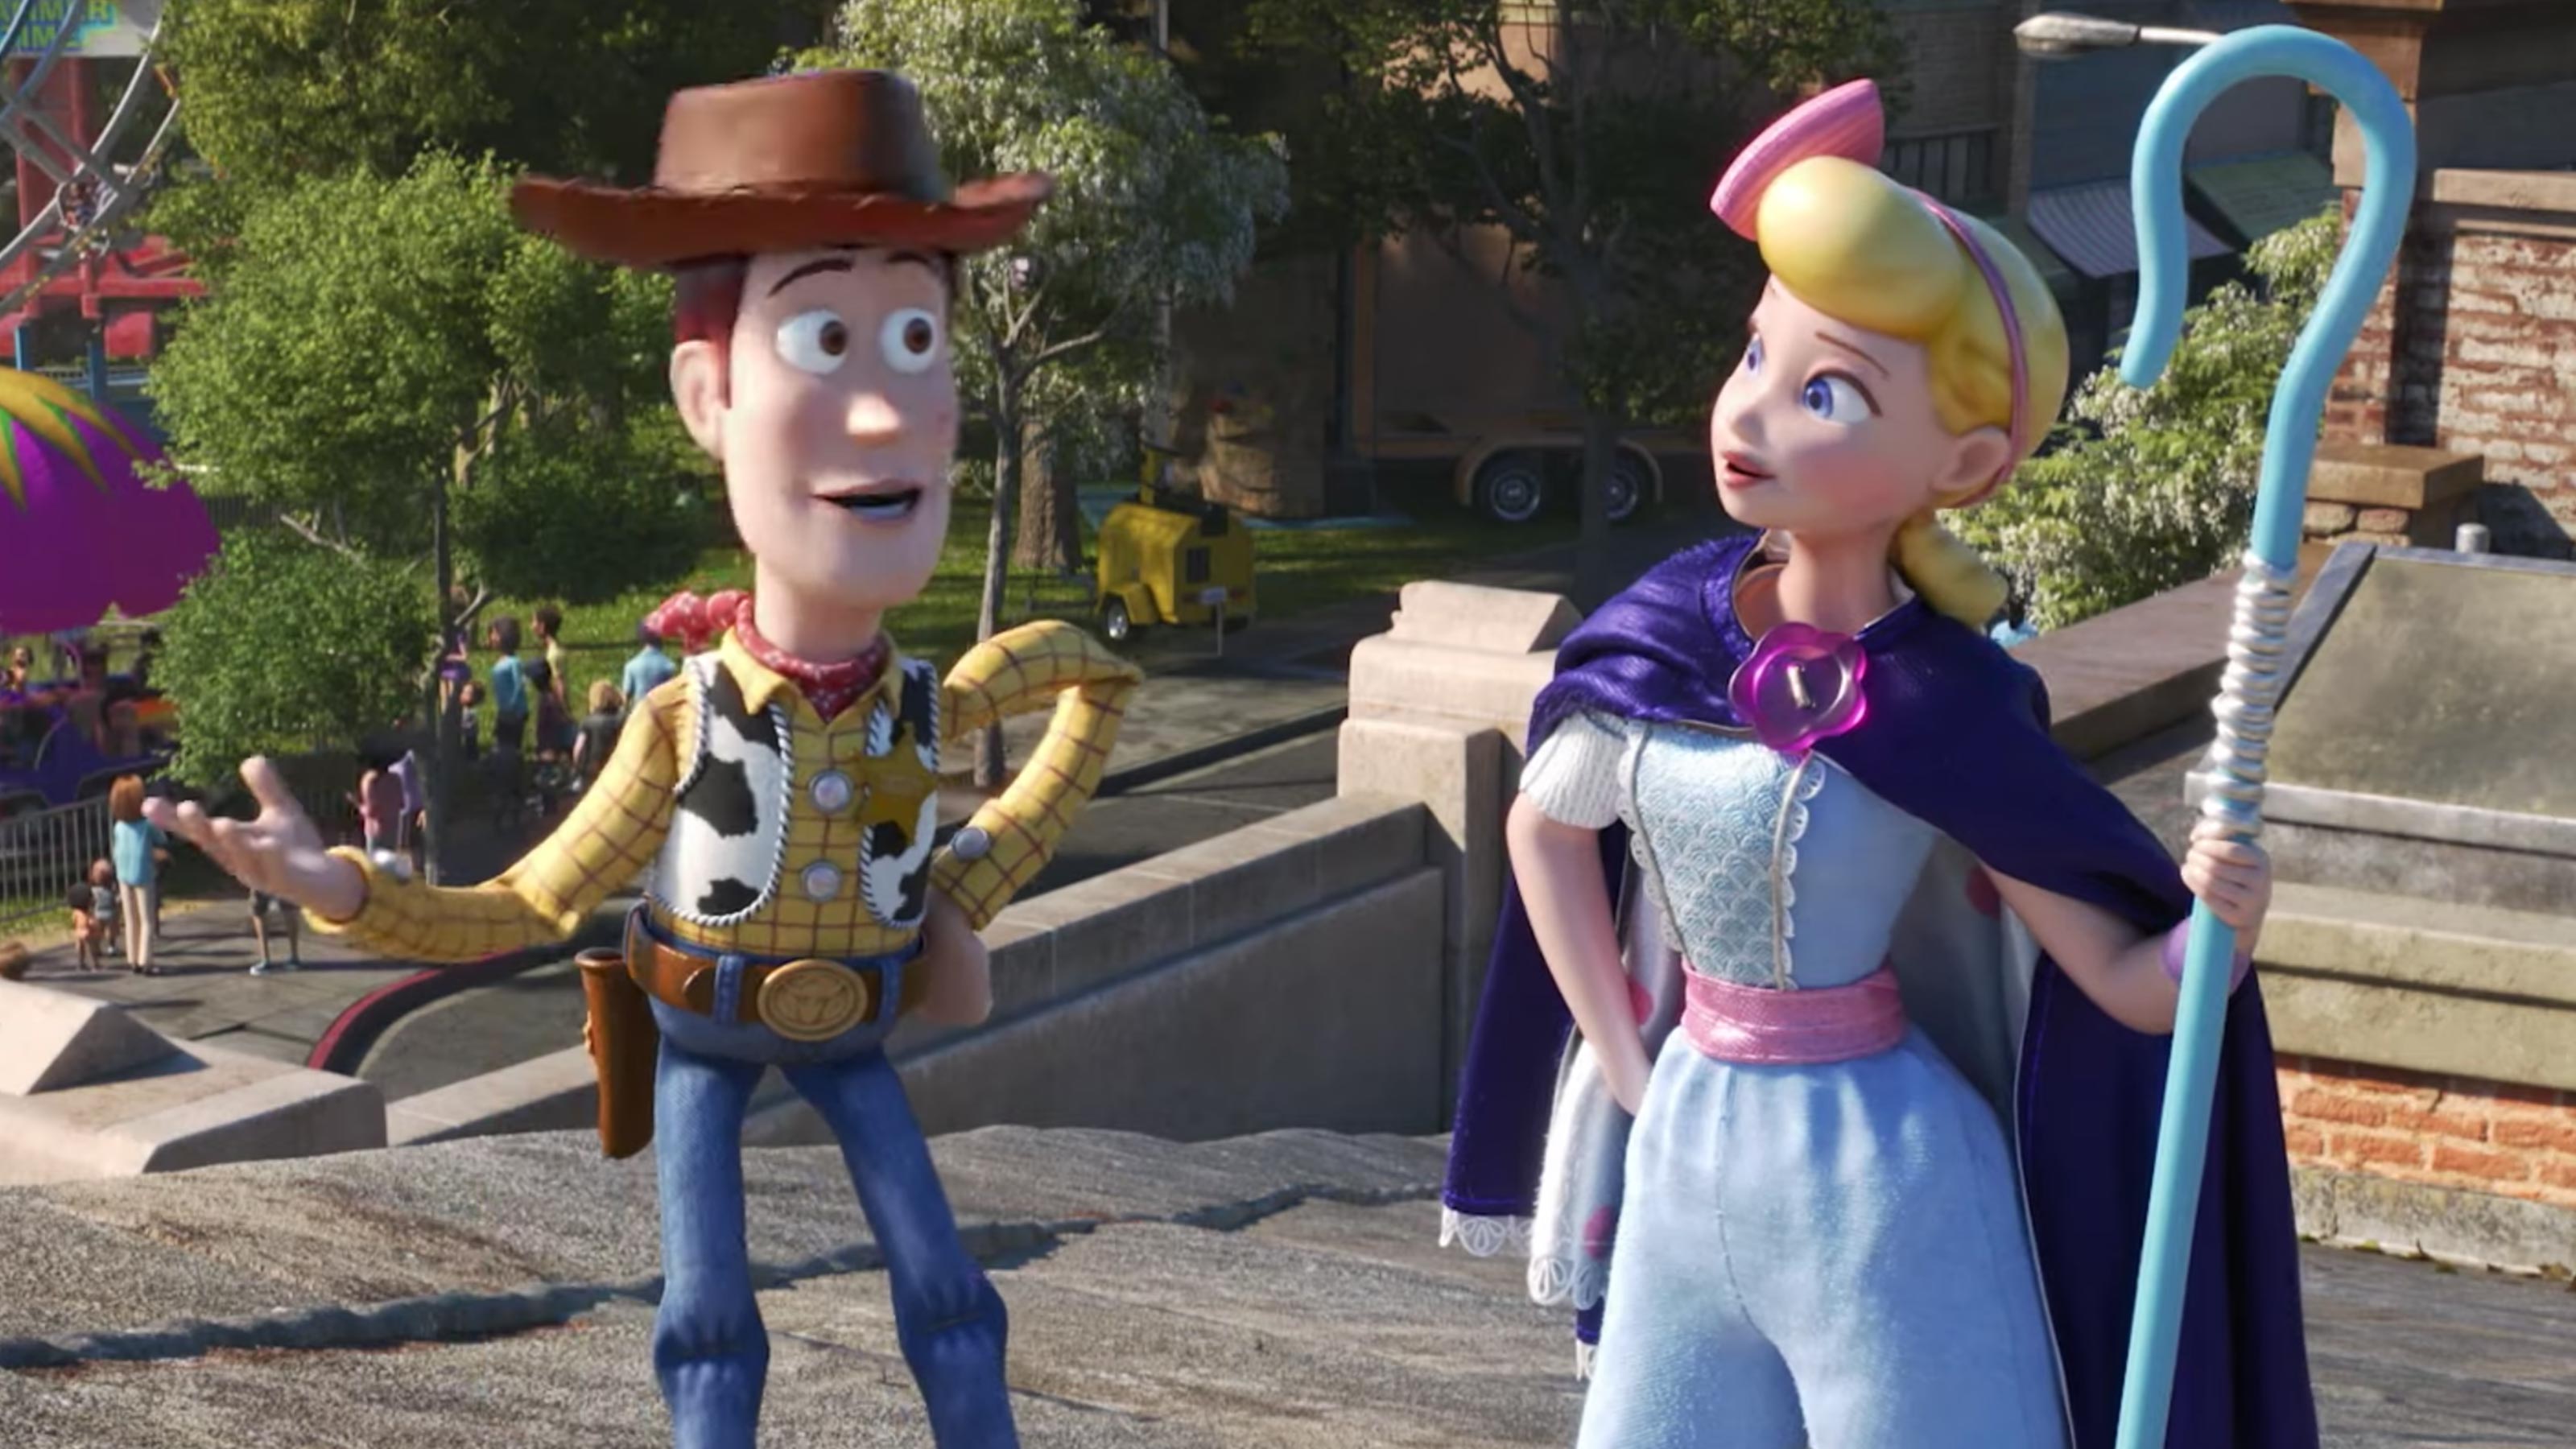 Toy Story 5 has officially been confirmed by Disney & Pixar